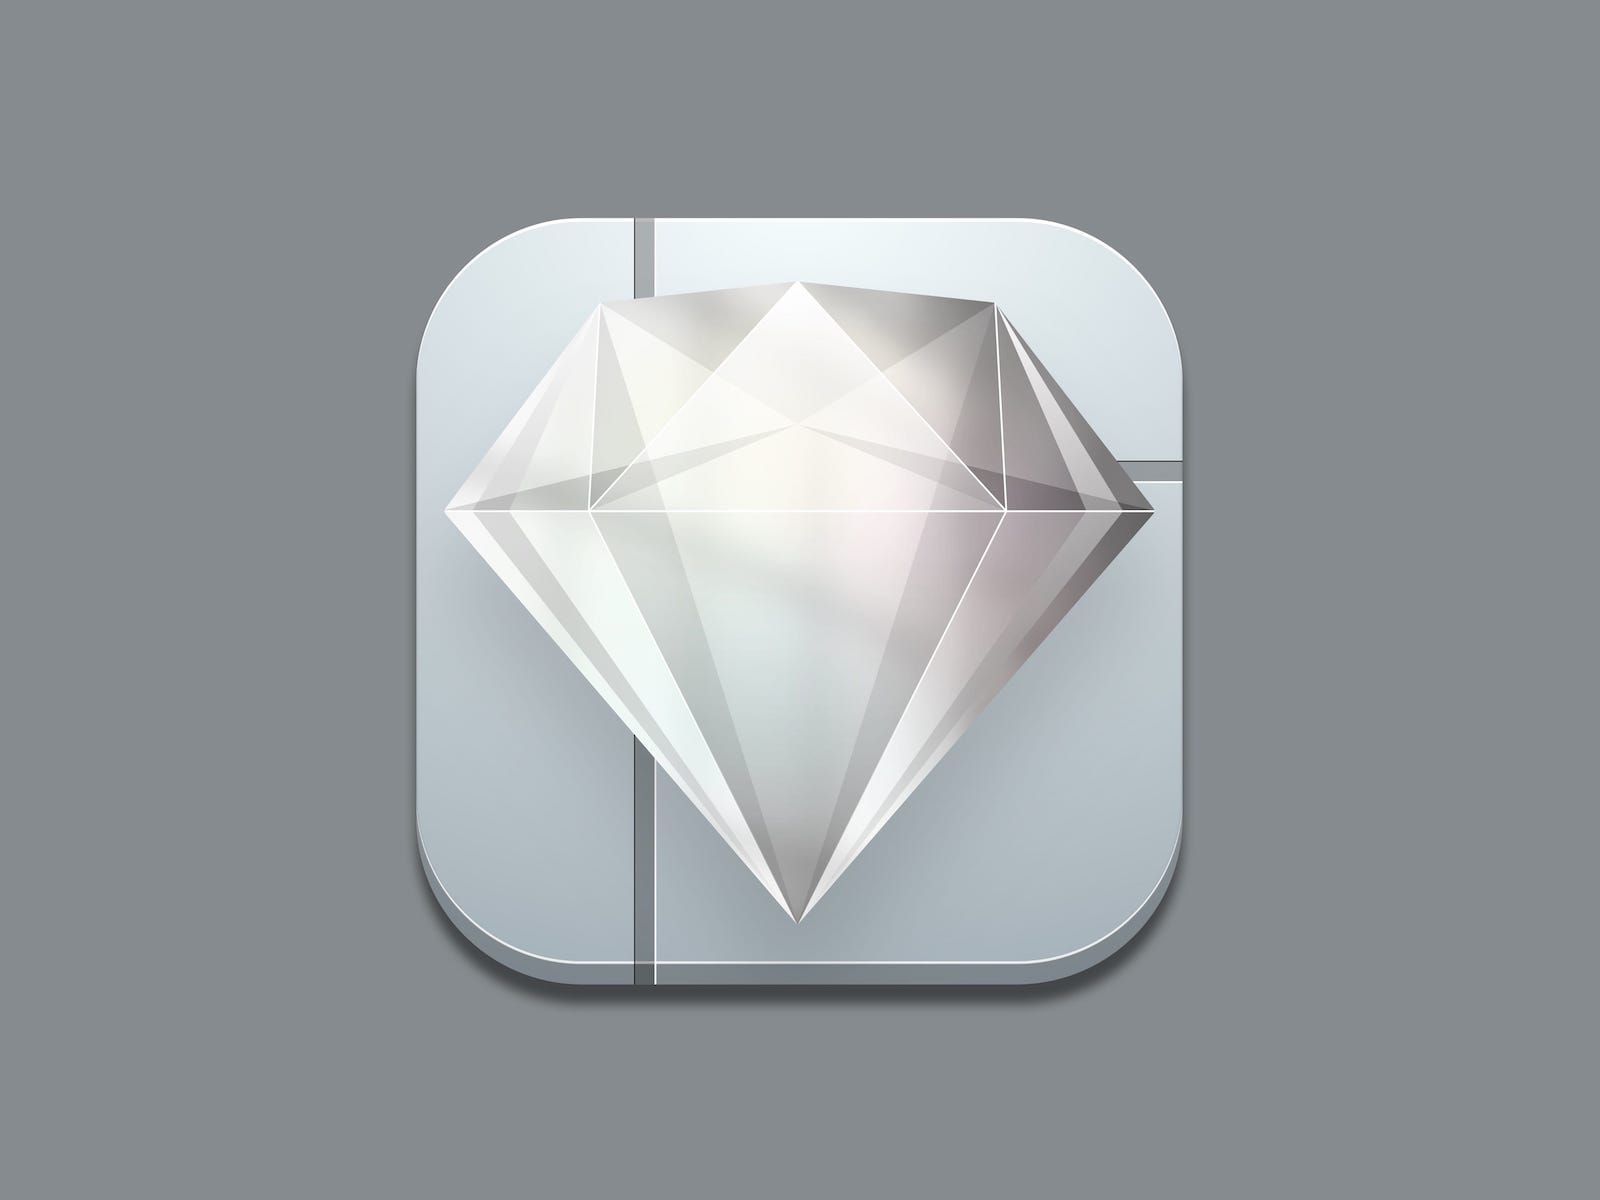 Sketch diamond icon but in gray.